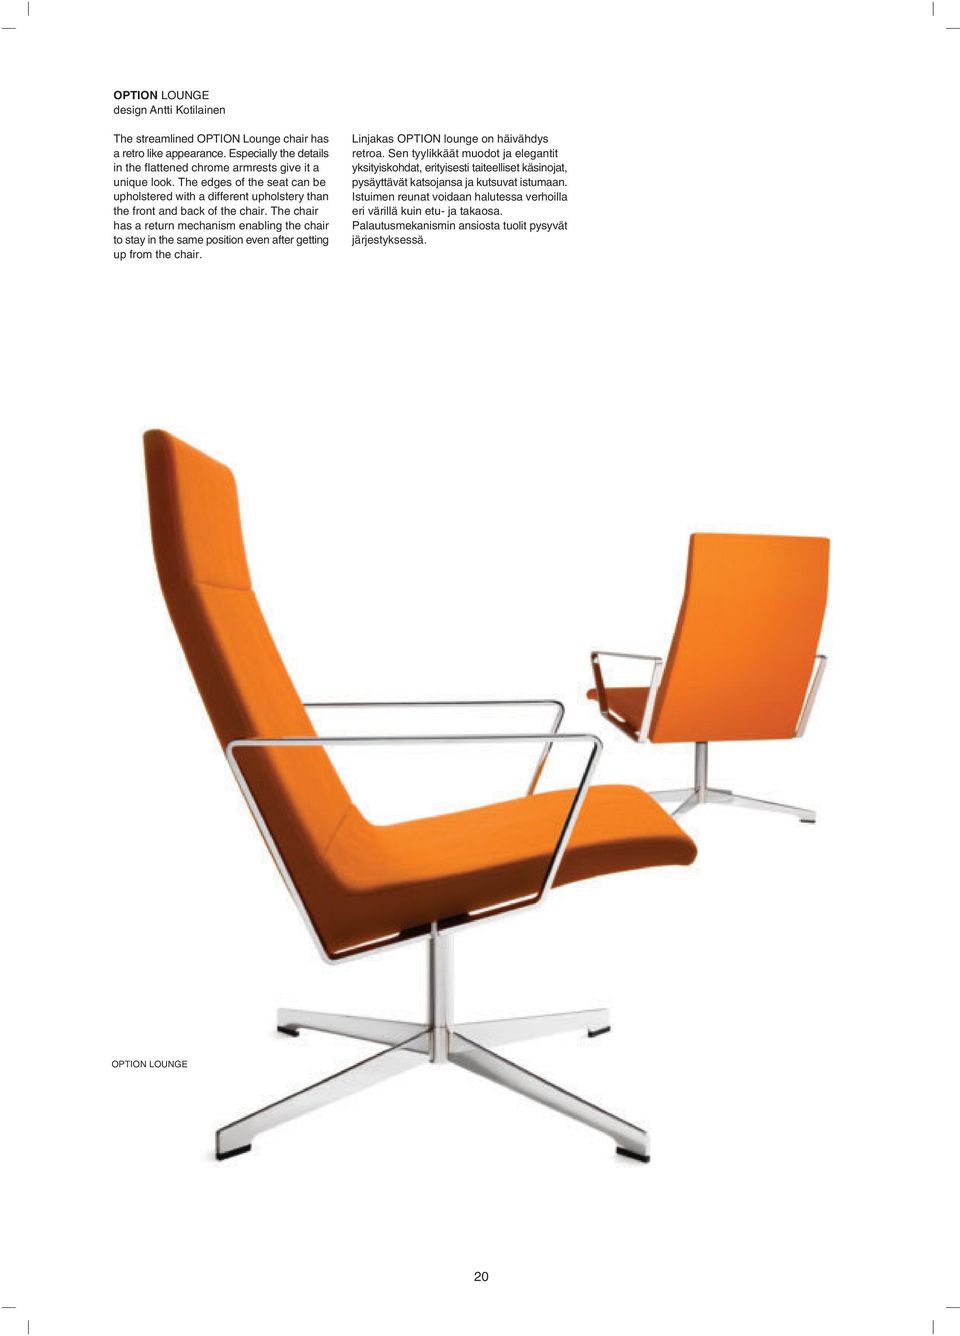 The chair has a return mechanism enabling the chair to stay in the same position even after getting up from the chair. Linjakas OPTION lounge on häivähdys retroa.